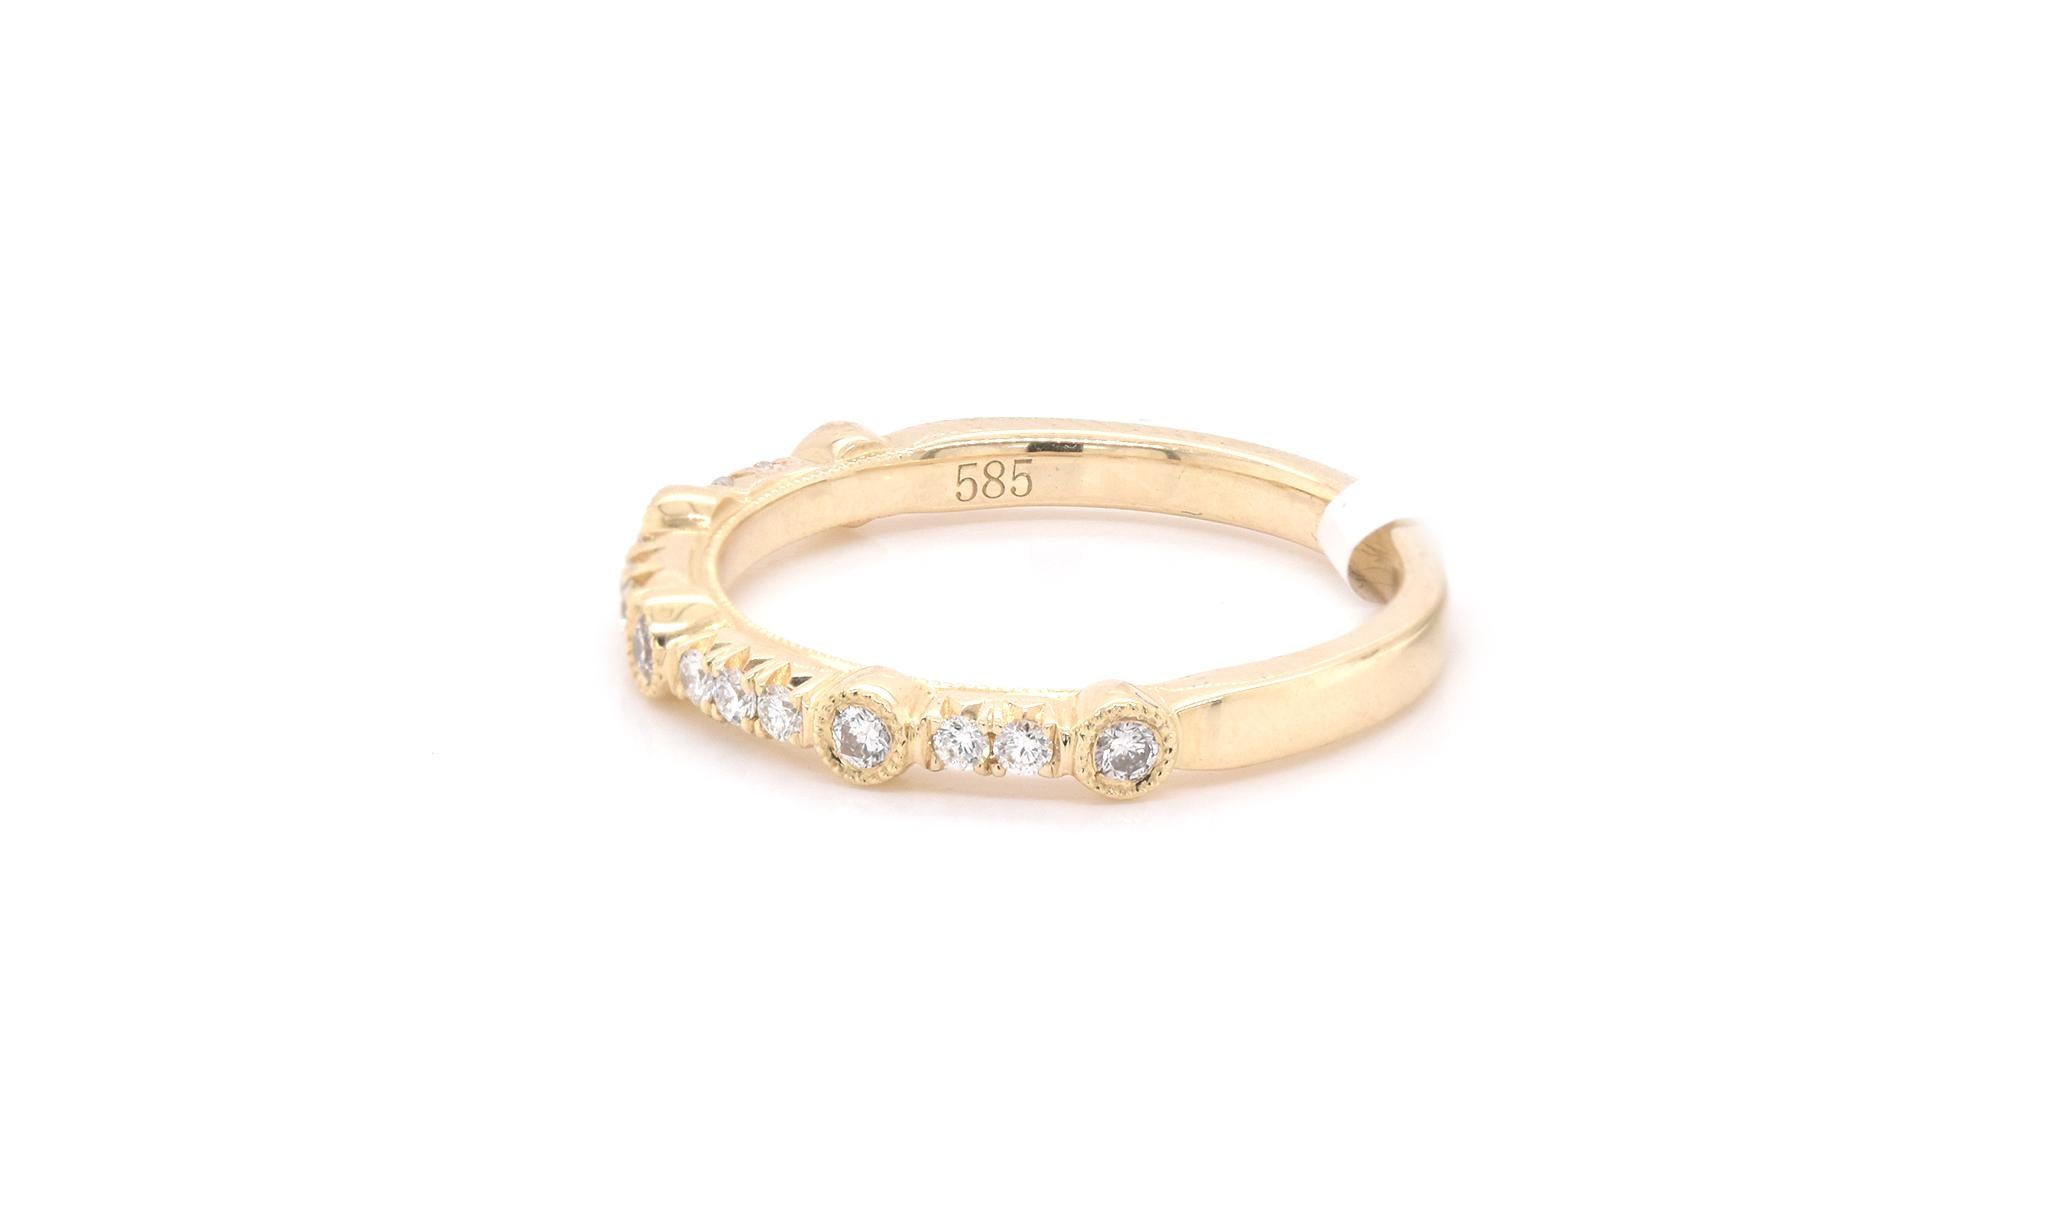 Designer: custom 
Material: 14k yellow gold
Diamond: 15 round brilliant cuts = 0.22cttw
Color: G 
Clarity: VS
Ring Size: 6
Dimensions: ring is 2.65mm wide
Weight: 2.48 grams